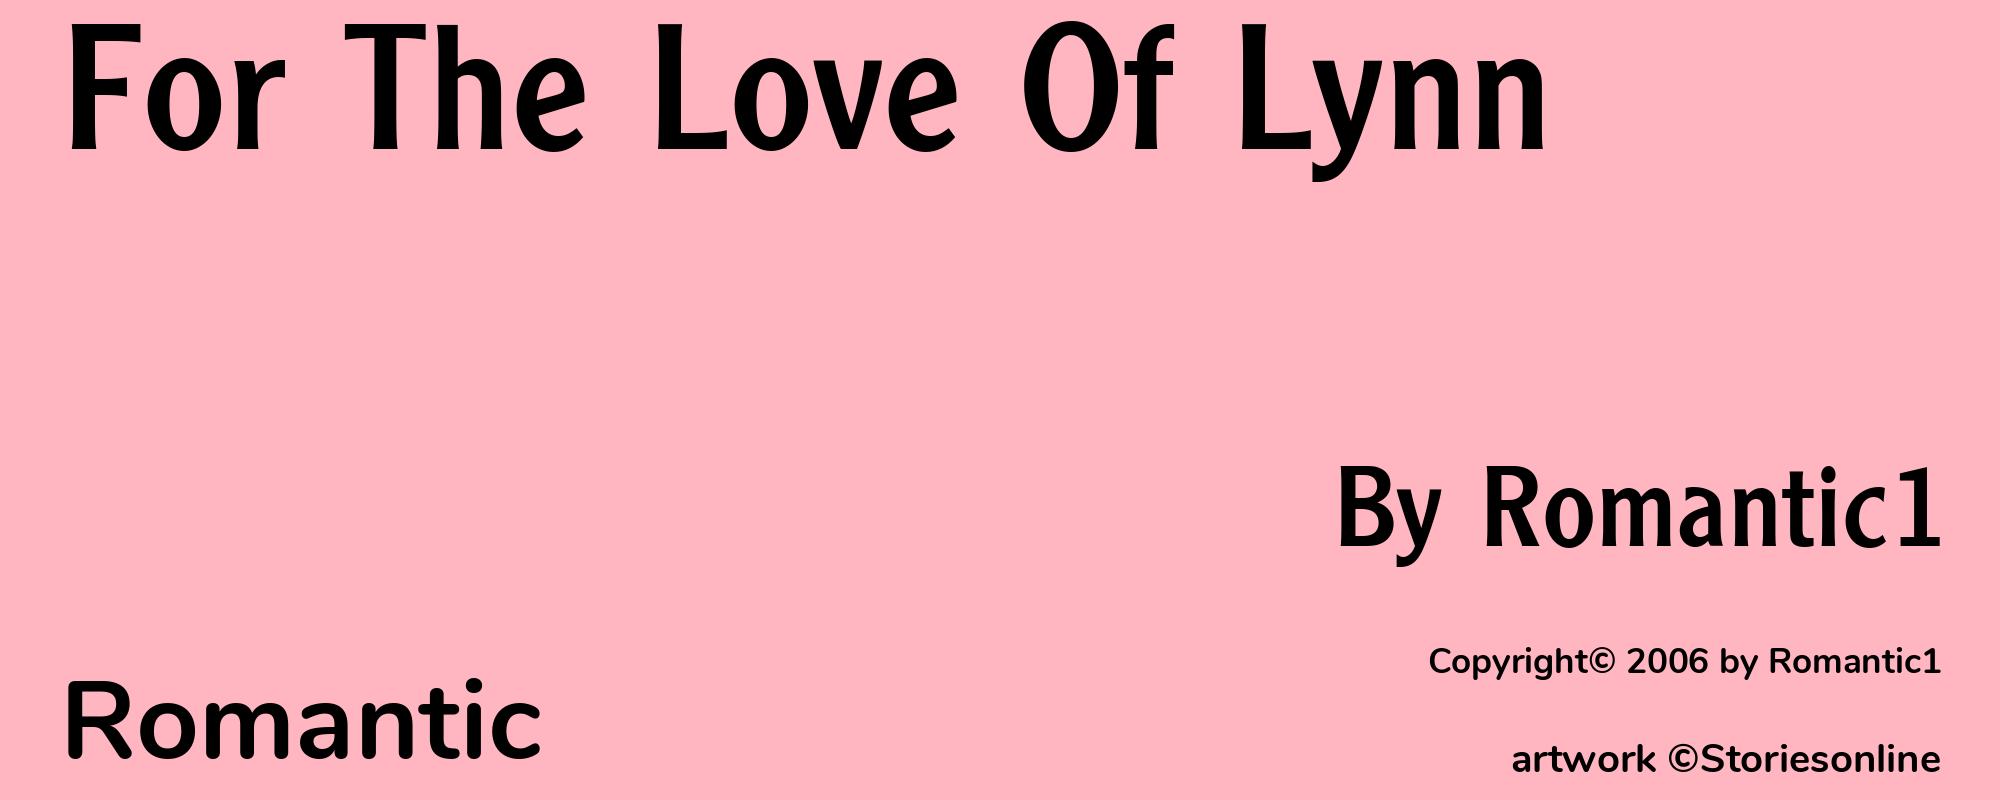 For The Love Of Lynn - Cover